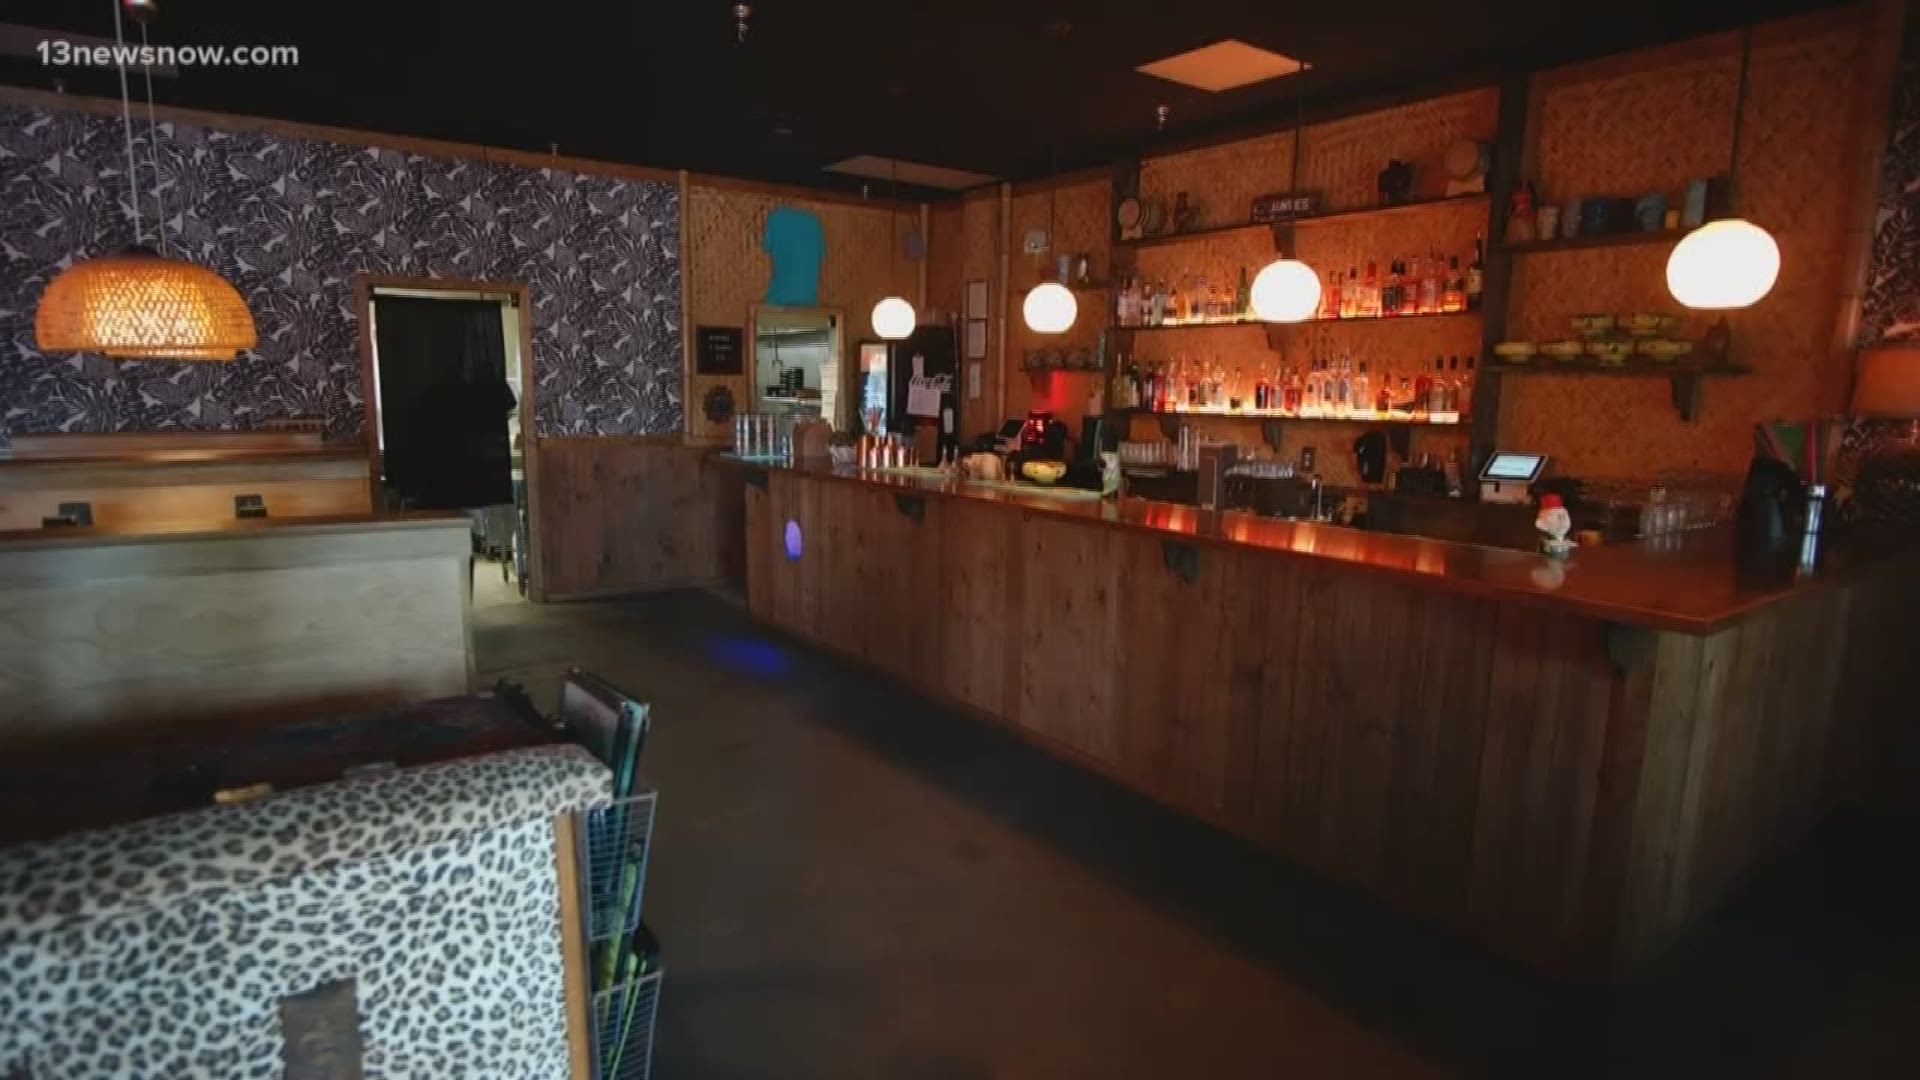 Auntie's Tiki Bar and Restaurant in Virginia Beach offers a unique experience. If you're interested in a place where you get authentic Hawaiian and Filipino dishes, look no further. The business also offers unique drinks too, perfect for date night.